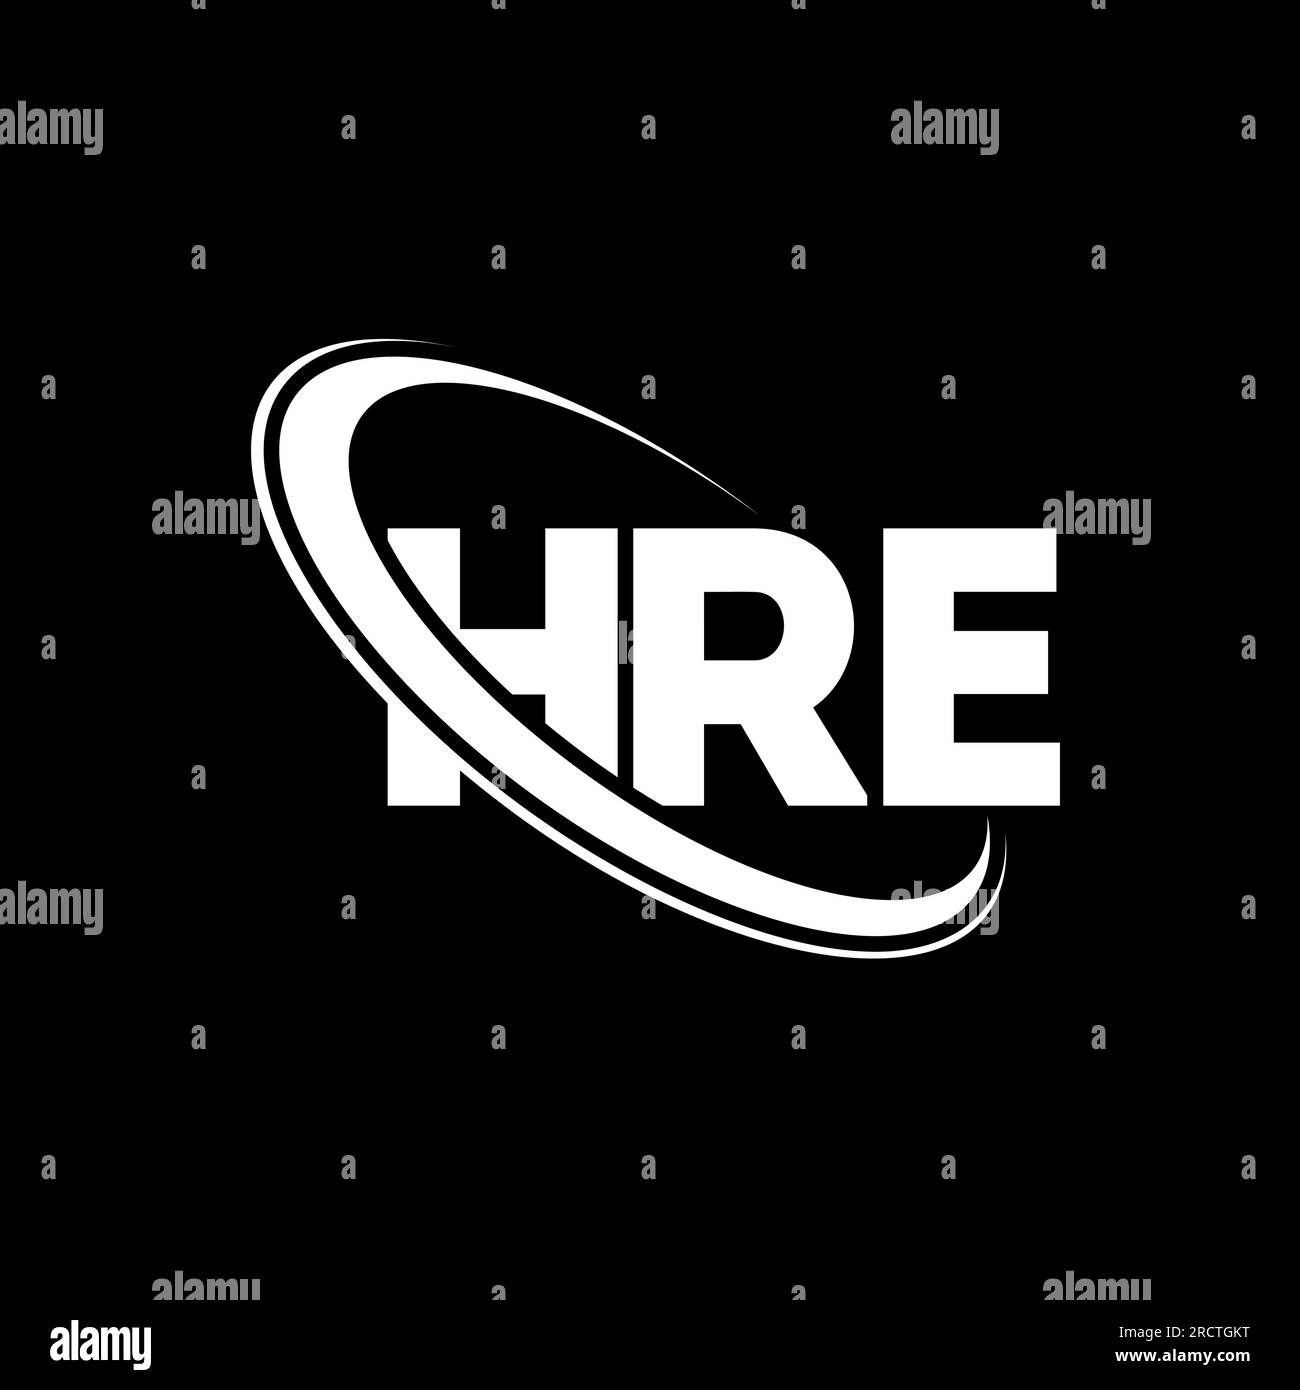 HRE logo. HRE letter. HRE letter logo design. Initials HRE logo linked with circle and uppercase monogram logo. HRE typography for technology, busines Stock Vector